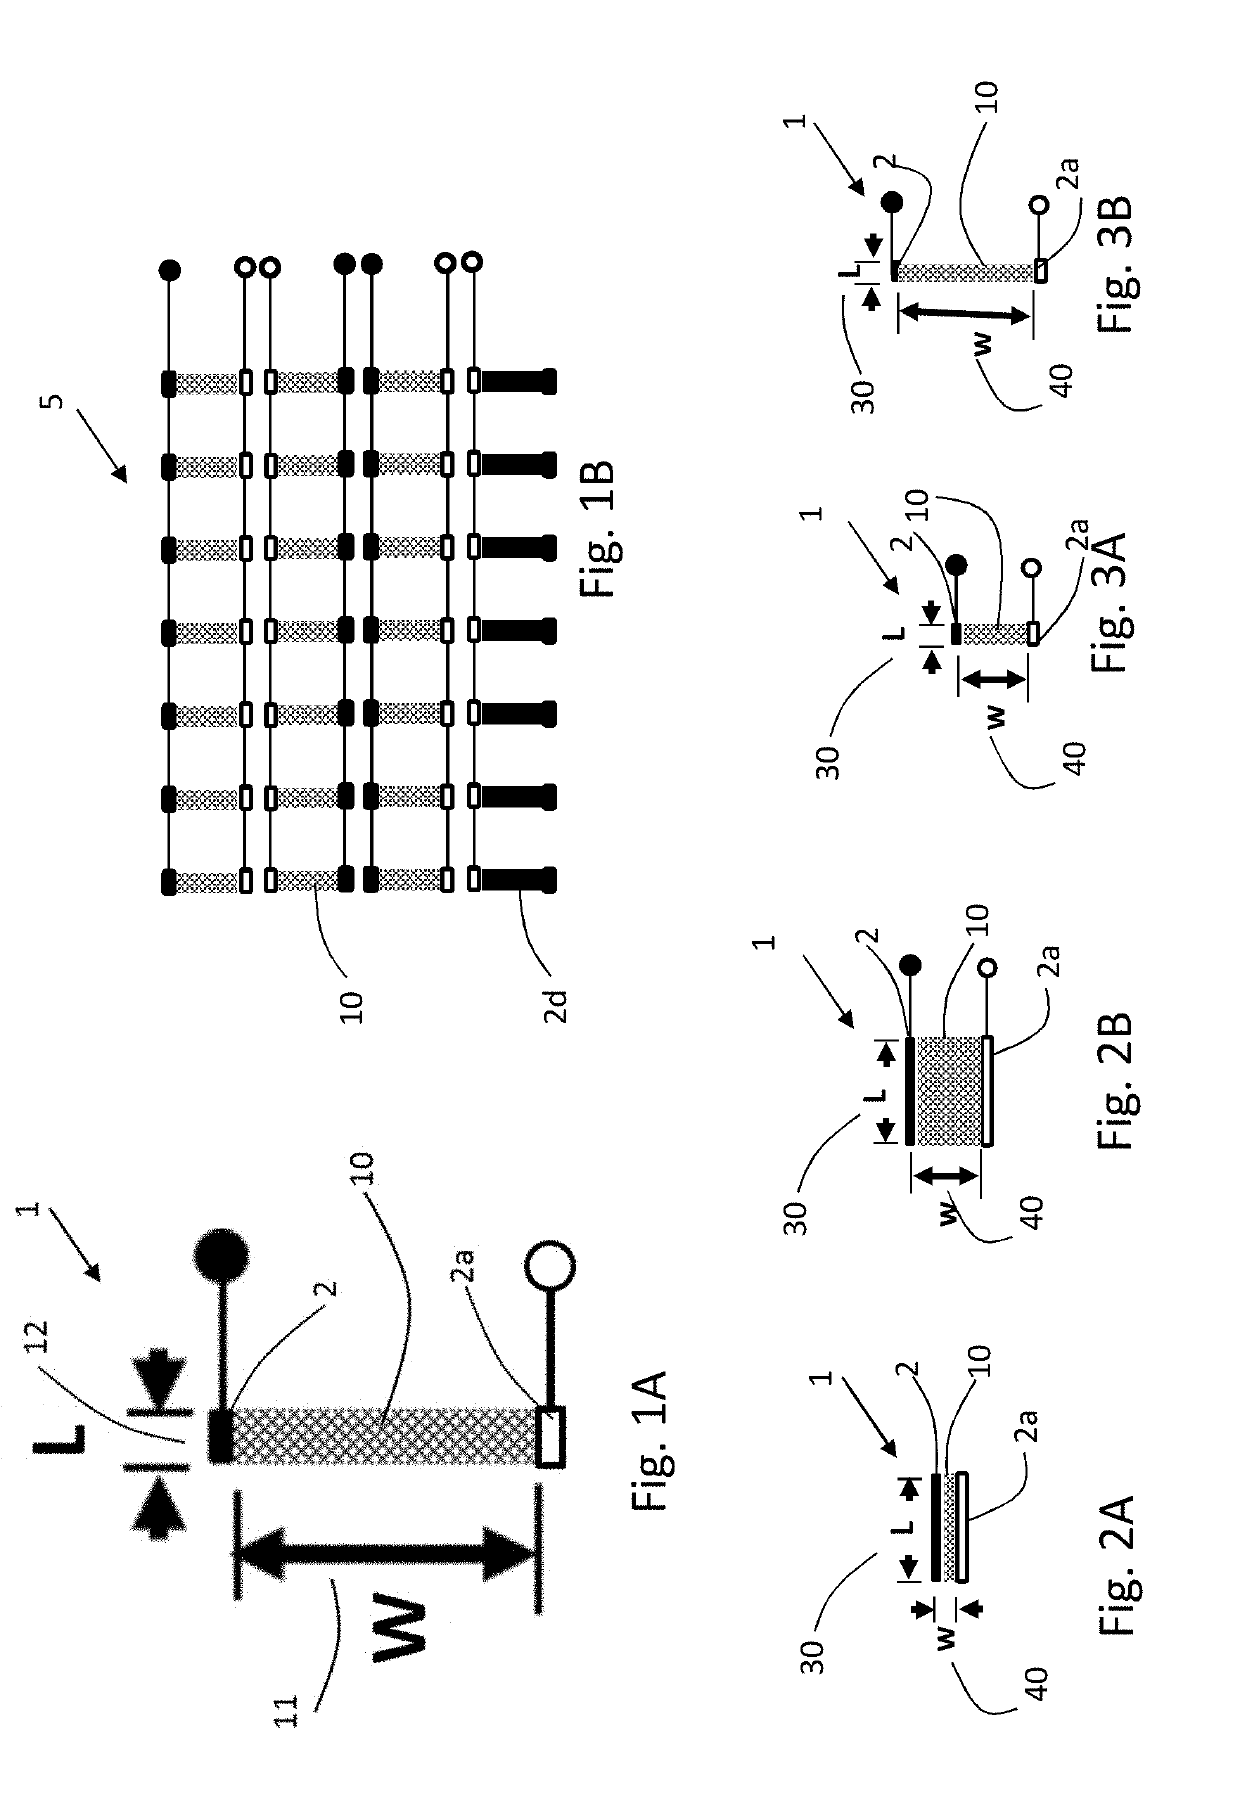 Apparatus and method of non-invasive directional tissue treatment using radiofrequency energy